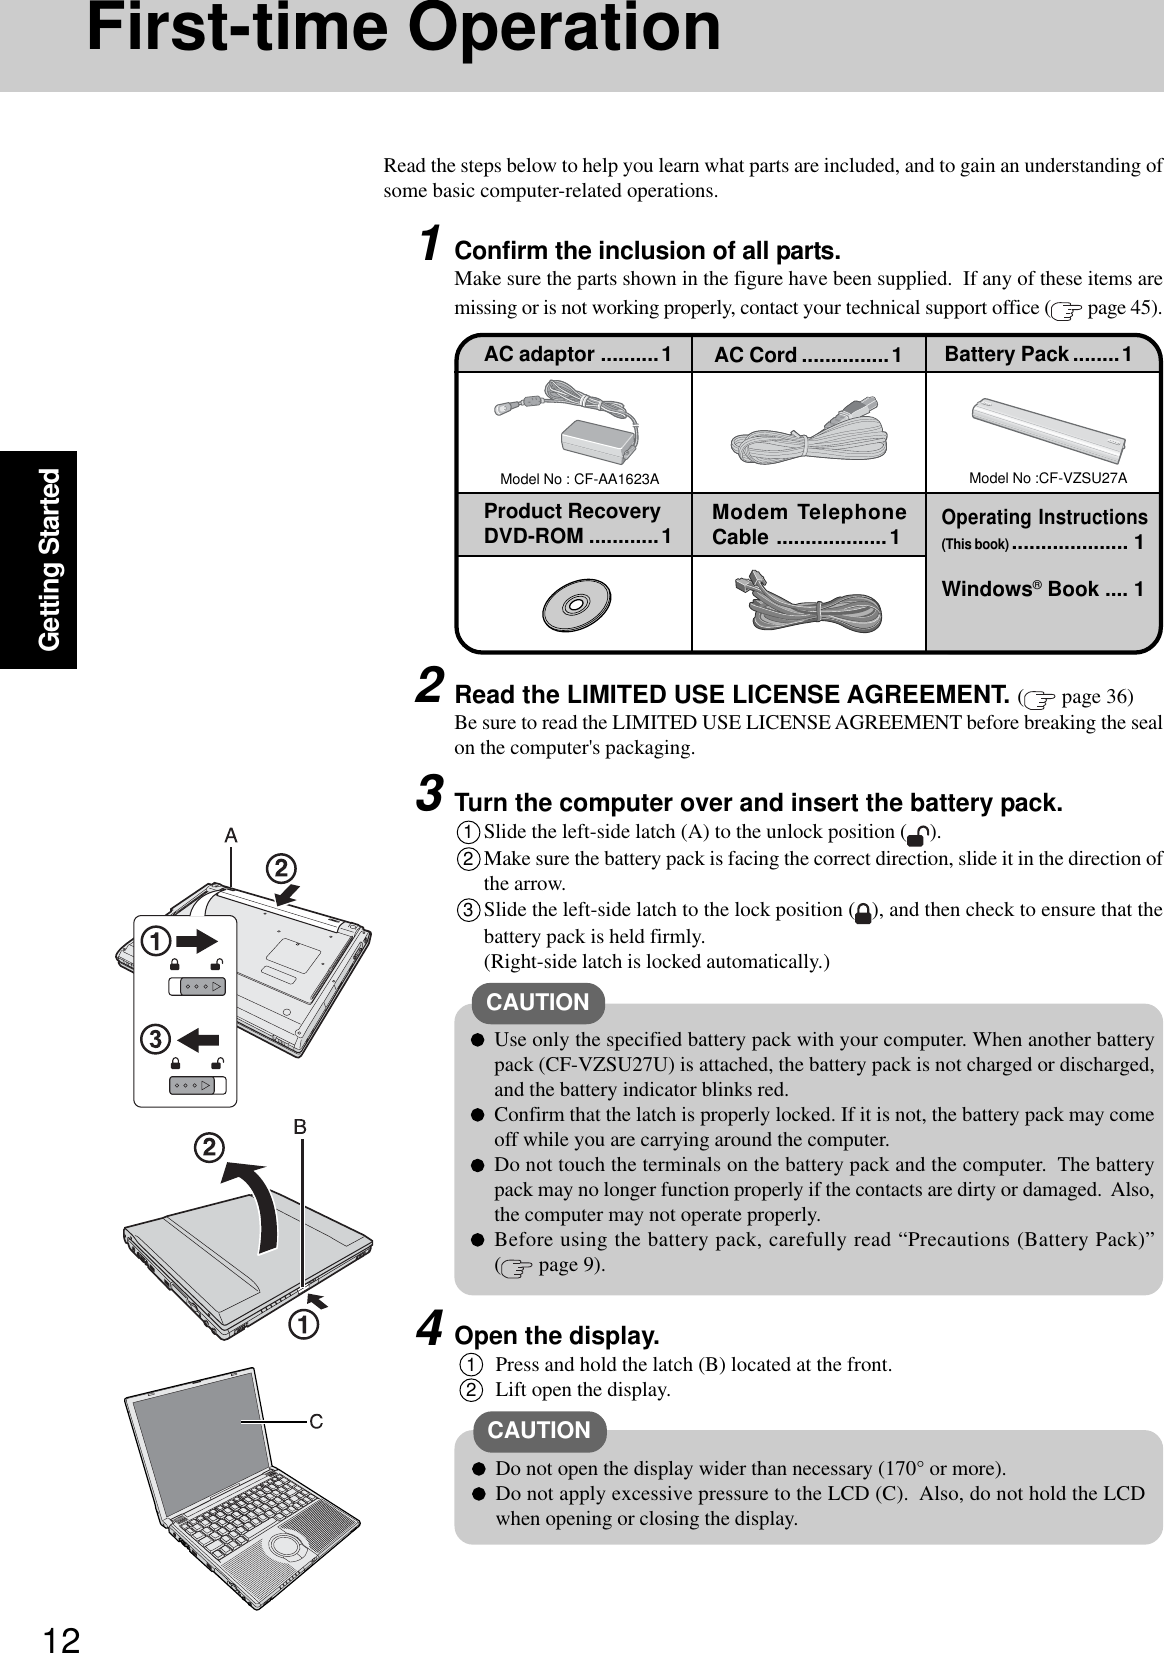 12Getting StartedFirst-time OperationRead the steps below to help you learn what parts are included, and to gain an understanding ofsome basic computer-related operations.1Confirm the inclusion of all parts.Make sure the parts shown in the figure have been supplied.  If any of these items aremissing or is not working properly, contact your technical support office (  page 45).Model No : CF-AA1623AAC adaptor ..........1Model No :CF-VZSU27AAC Cord ...............1 Battery Pack ........1Product RecoveryDVD-ROM ............1 Modem TelephoneCable ...................1Windows® Book .... 1Operating Instructions(This book).................... 13Turn the computer over and insert the battery pack.1Slide the left-side latch (A) to the unlock position ( ).2Make sure the battery pack is facing the correct direction, slide it in the direction ofthe arrow.3Slide the left-side latch to the lock position ( ), and then check to ensure that thebattery pack is held firmly.(Right-side latch is locked automatically.)CAUTIONUse only the specified battery pack with your computer. When another batterypack (CF-VZSU27U) is attached, the battery pack is not charged or discharged,and the battery indicator blinks red.Confirm that the latch is properly locked. If it is not, the battery pack may comeoff while you are carrying around the computer.Do not touch the terminals on the battery pack and the computer.  The batterypack may no longer function properly if the contacts are dirty or damaged.  Also,the computer may not operate properly.Before using the battery pack, carefully read “Precautions (Battery Pack)”( page 9).2Read the LIMITED USE LICENSE AGREEMENT. ( page 36)Be sure to read the LIMITED USE LICENSE AGREEMENT before breaking the sealon the computer&apos;s packaging.4Open the display.1Press and hold the latch (B) located at the front.2Lift open the display.CAUTIONDo not open the display wider than necessary (170° or more).Do not apply excessive pressure to the LCD (C).  Also, do not hold the LCDwhen opening or closing the display.